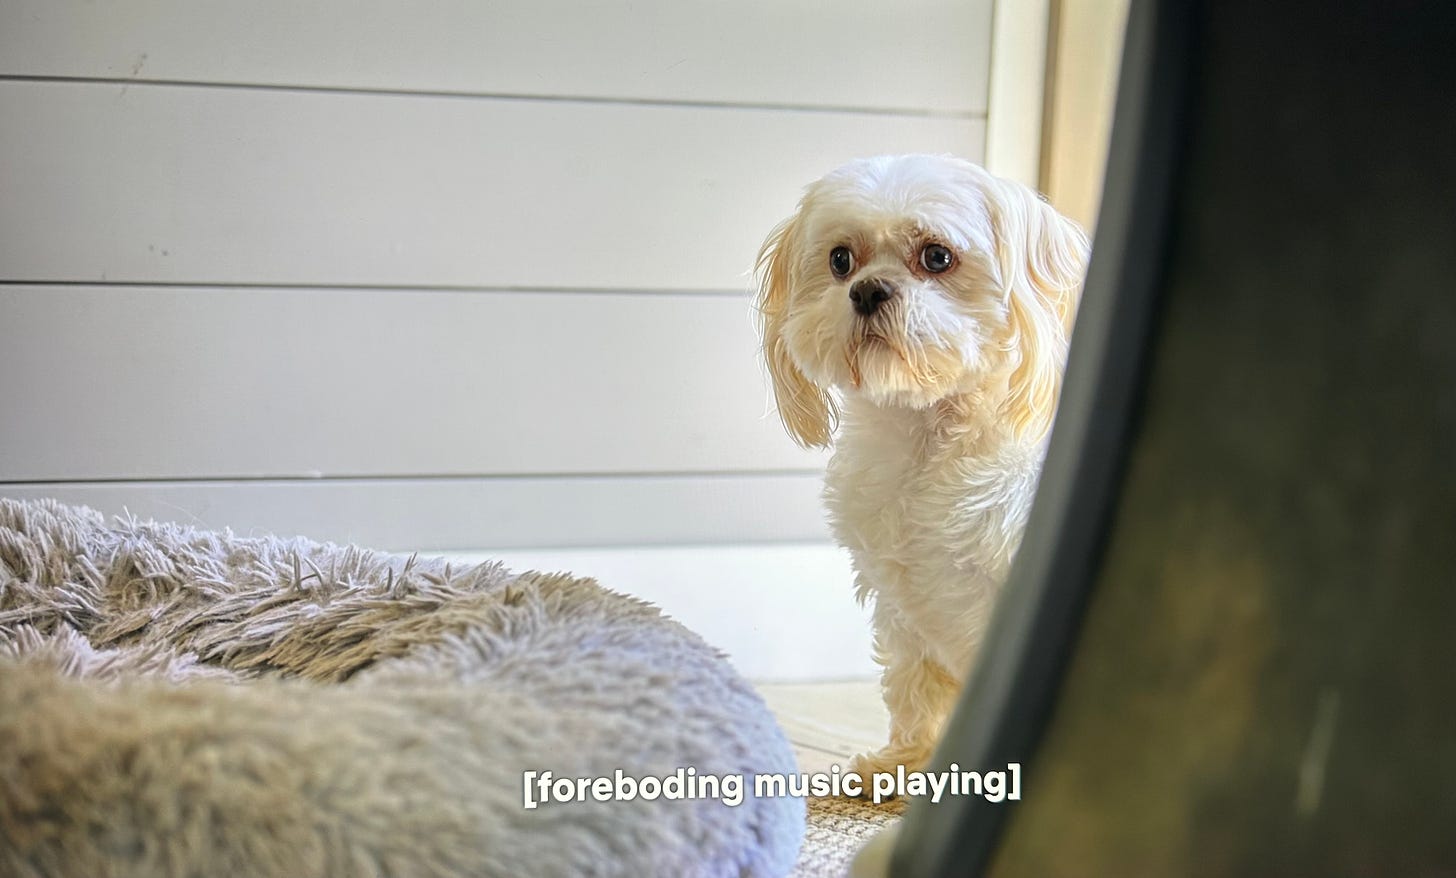 A screenshot of a shih tzu from LOTS with foreboding music playing in the subtitle.